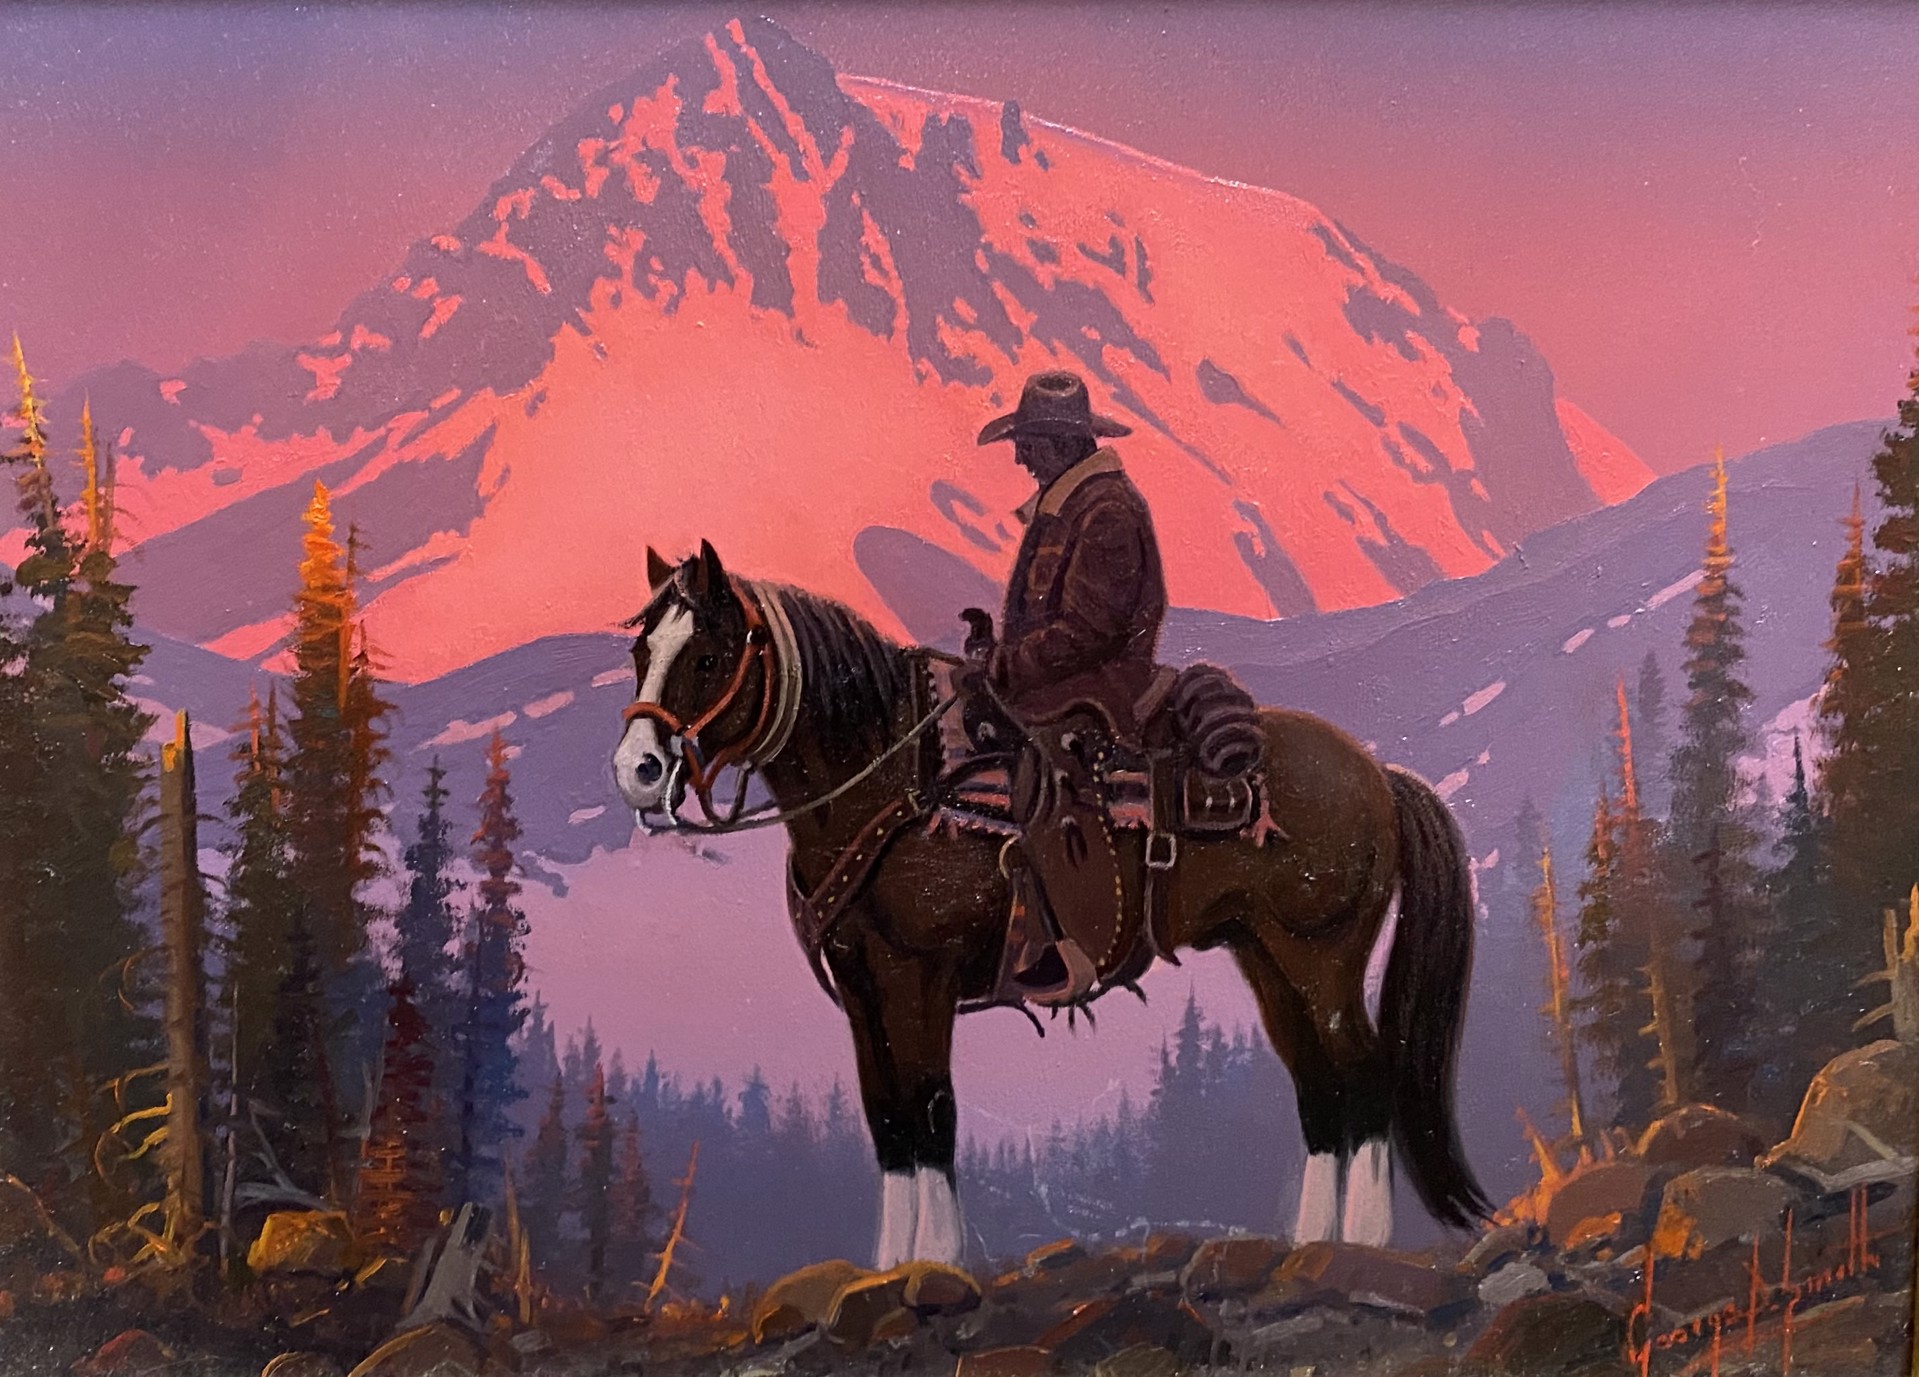 WRANGLER AT SUNSET by George "Dee" Smith